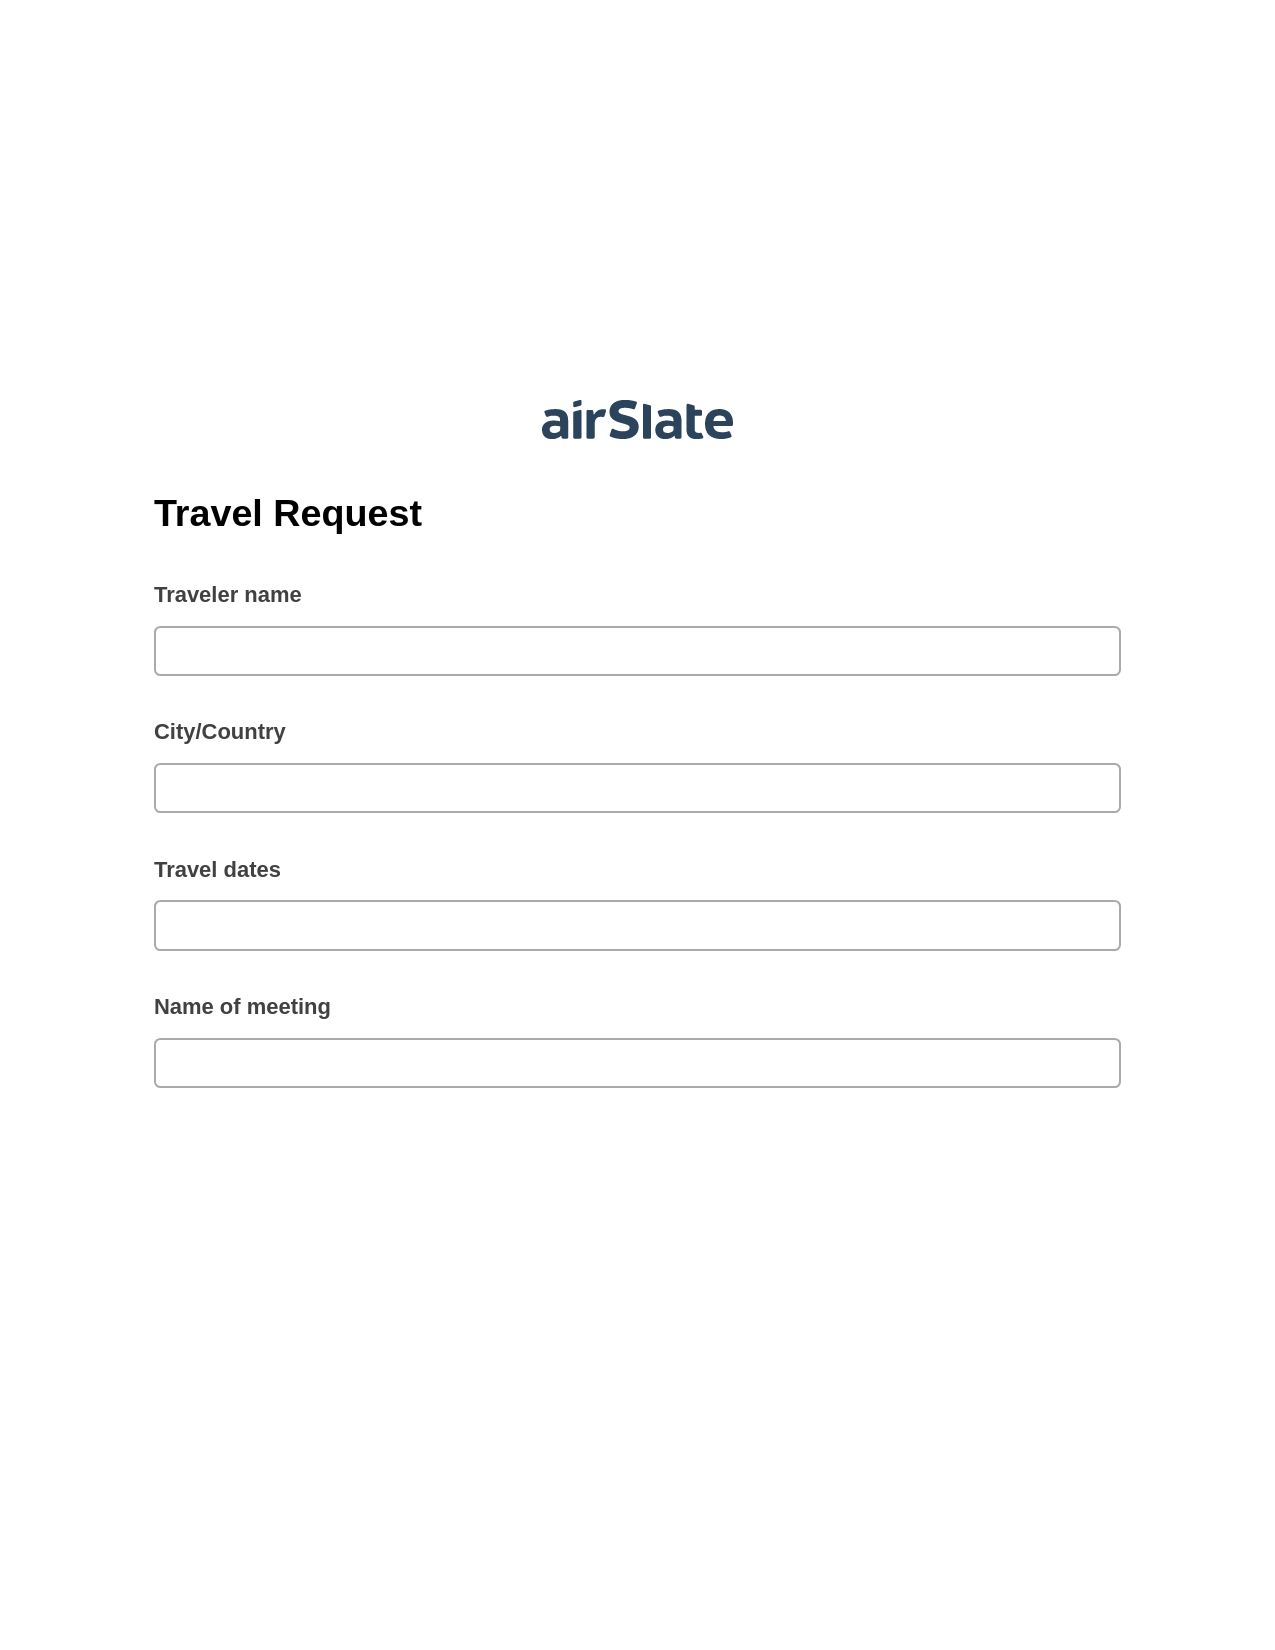 Travel Request Pre-fill Document Bot, Email Notification Bot, Box Bot